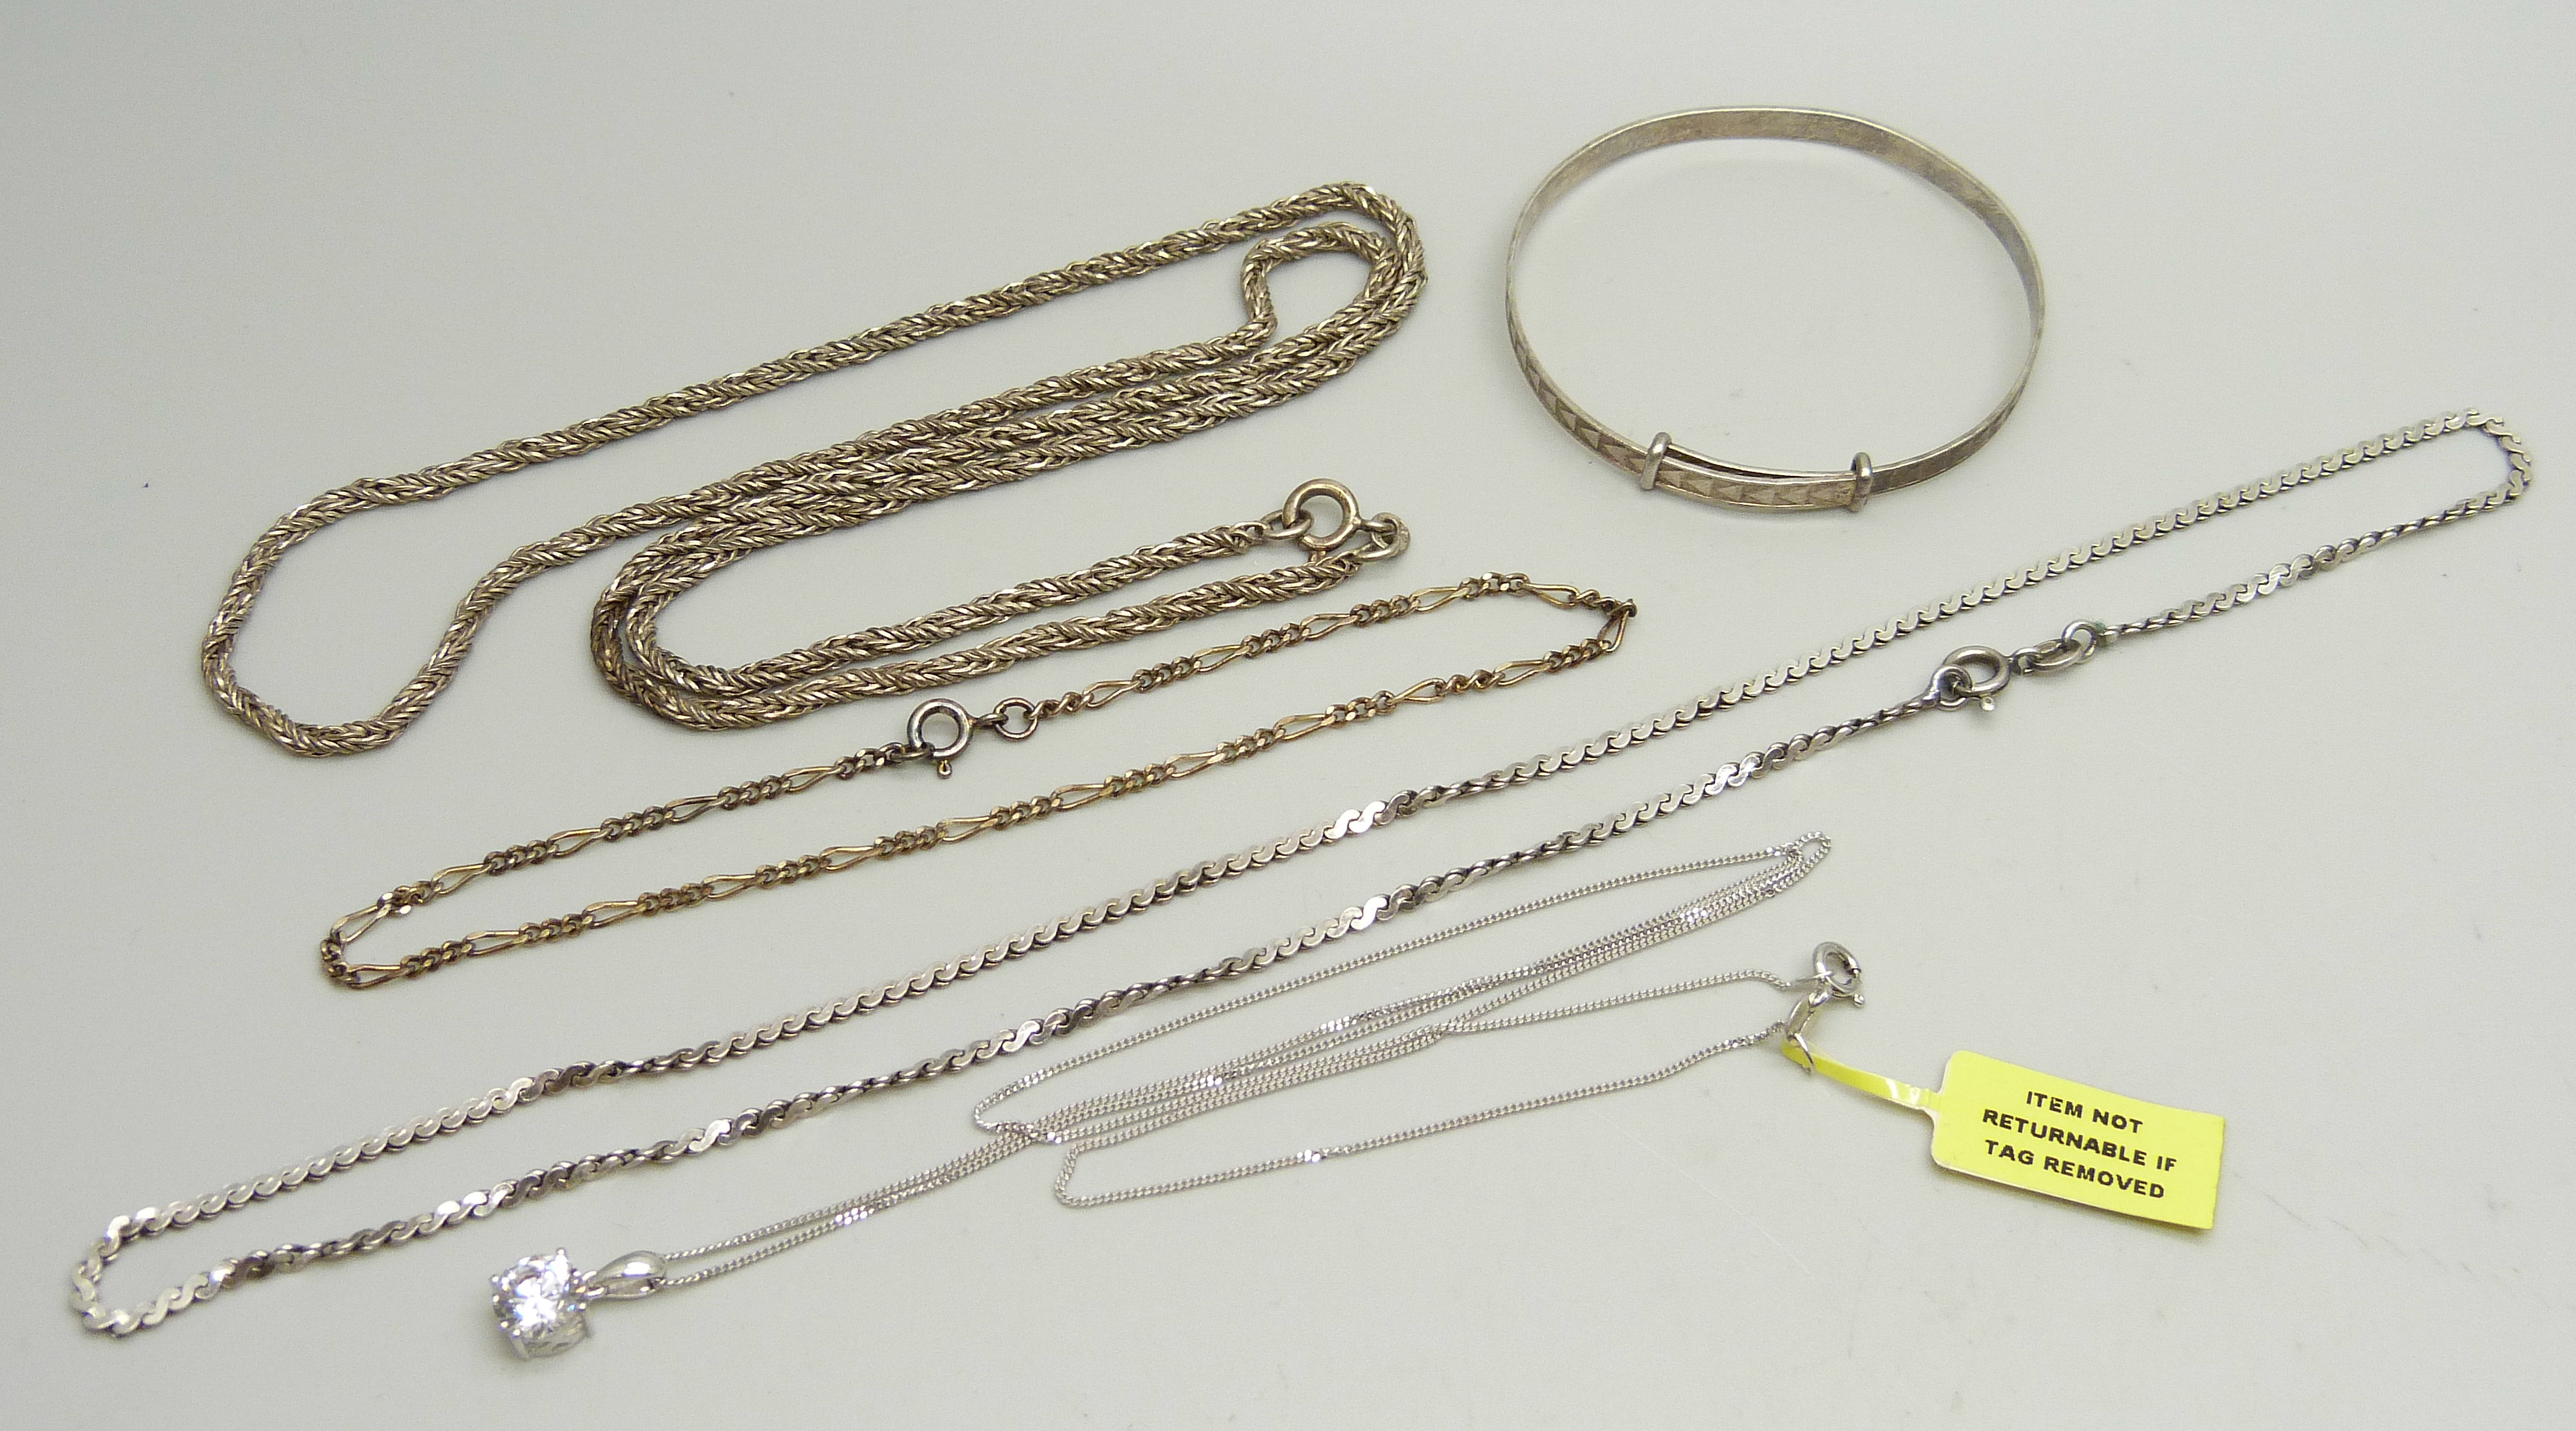 A collection of silver jewellery - a 24cm figaro bracelet, a child's bangle, a pendant and chain and